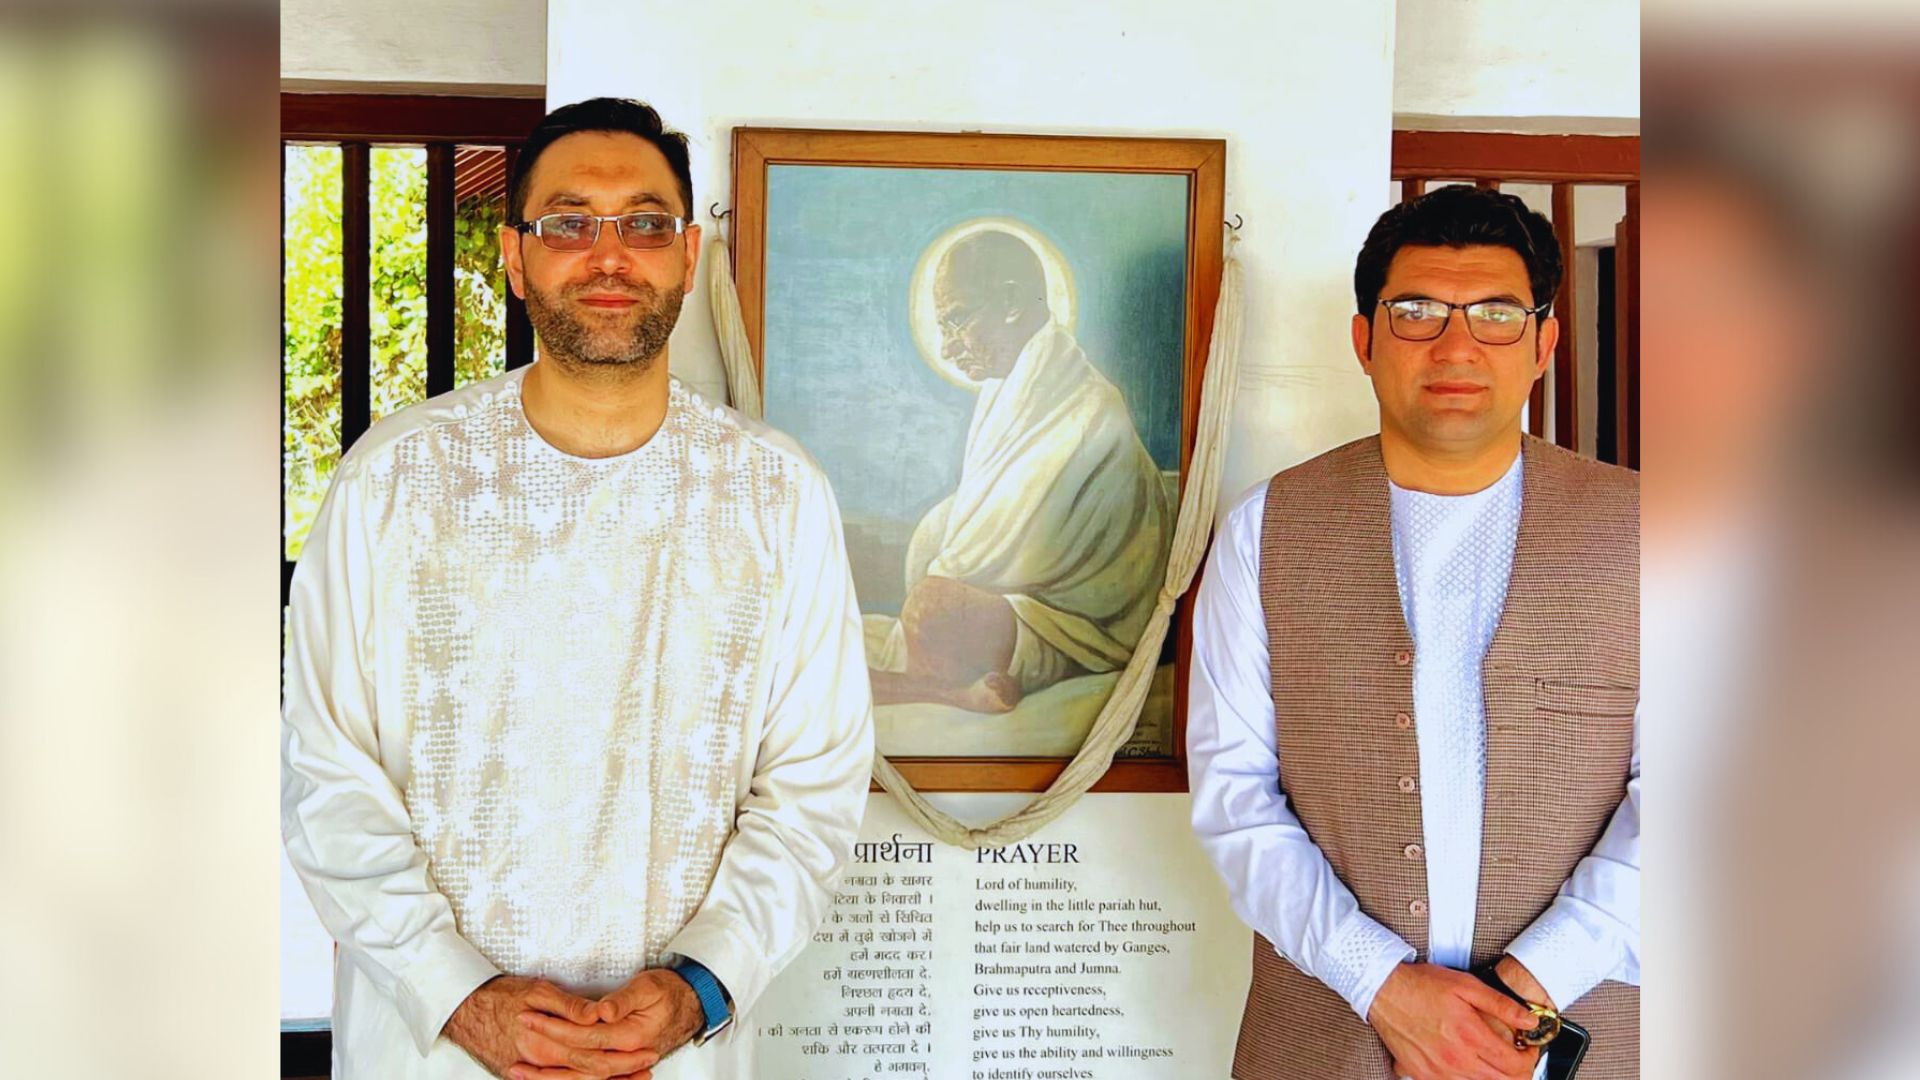 The current Afghan ambassador to India, Farid Mamundzay (left), and his former head of trade, Qadir Shah (right), in India